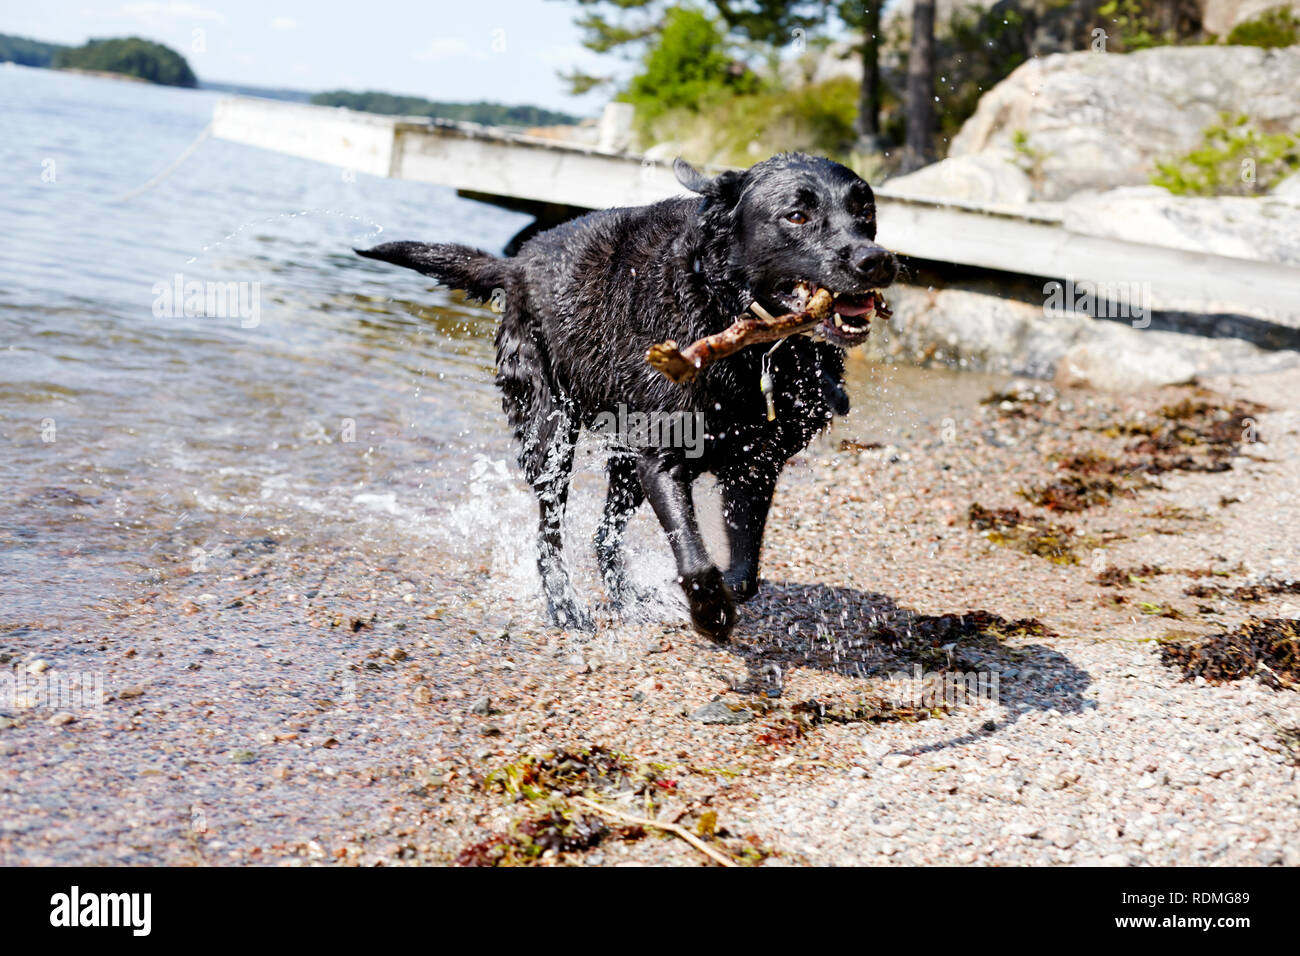 Dog with stick running across riverbank Stock Photo